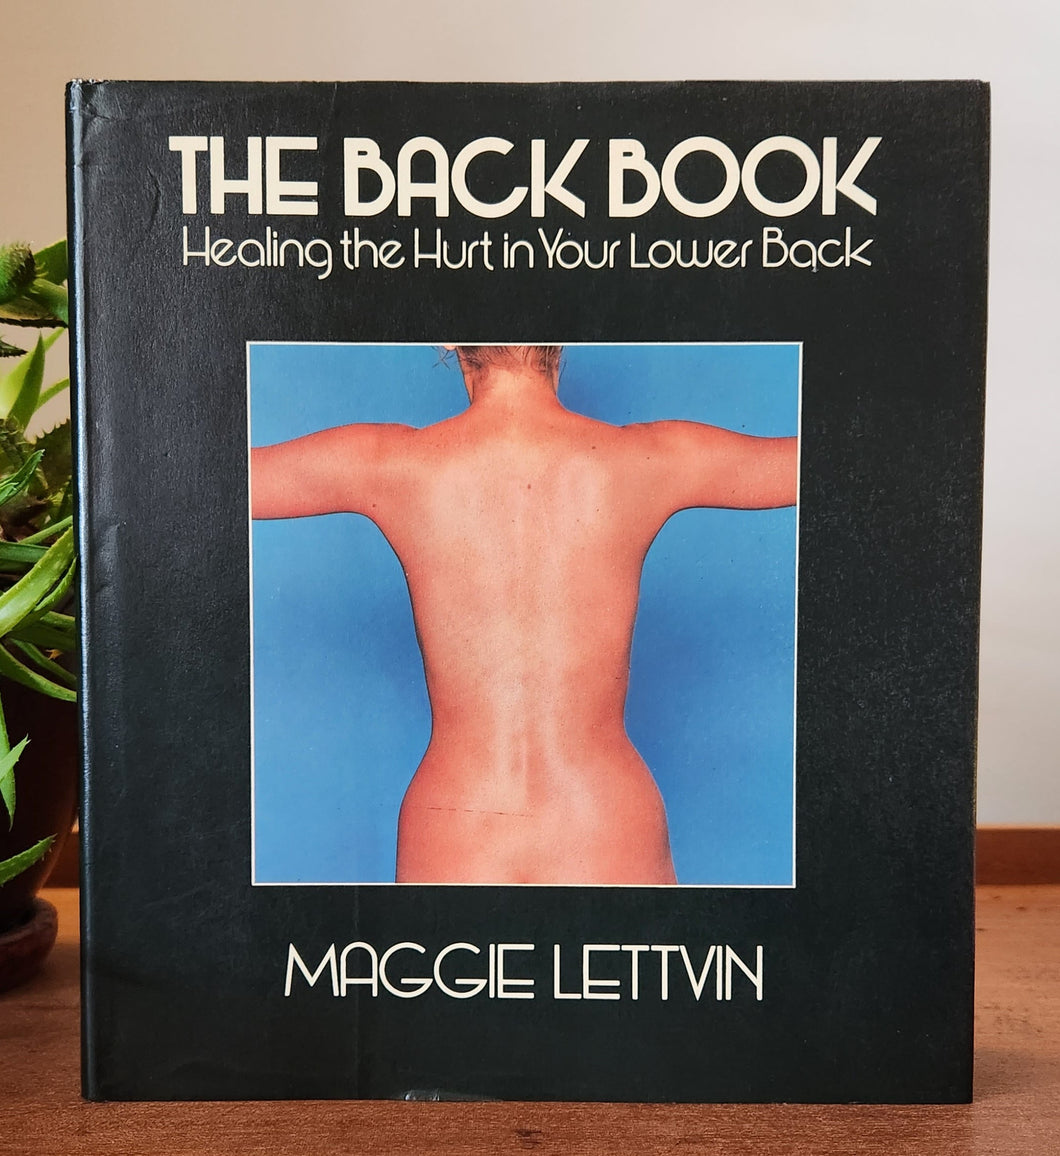 The Back Book: Healing the Hurt in Your Lower Back by Maggie Lettvin